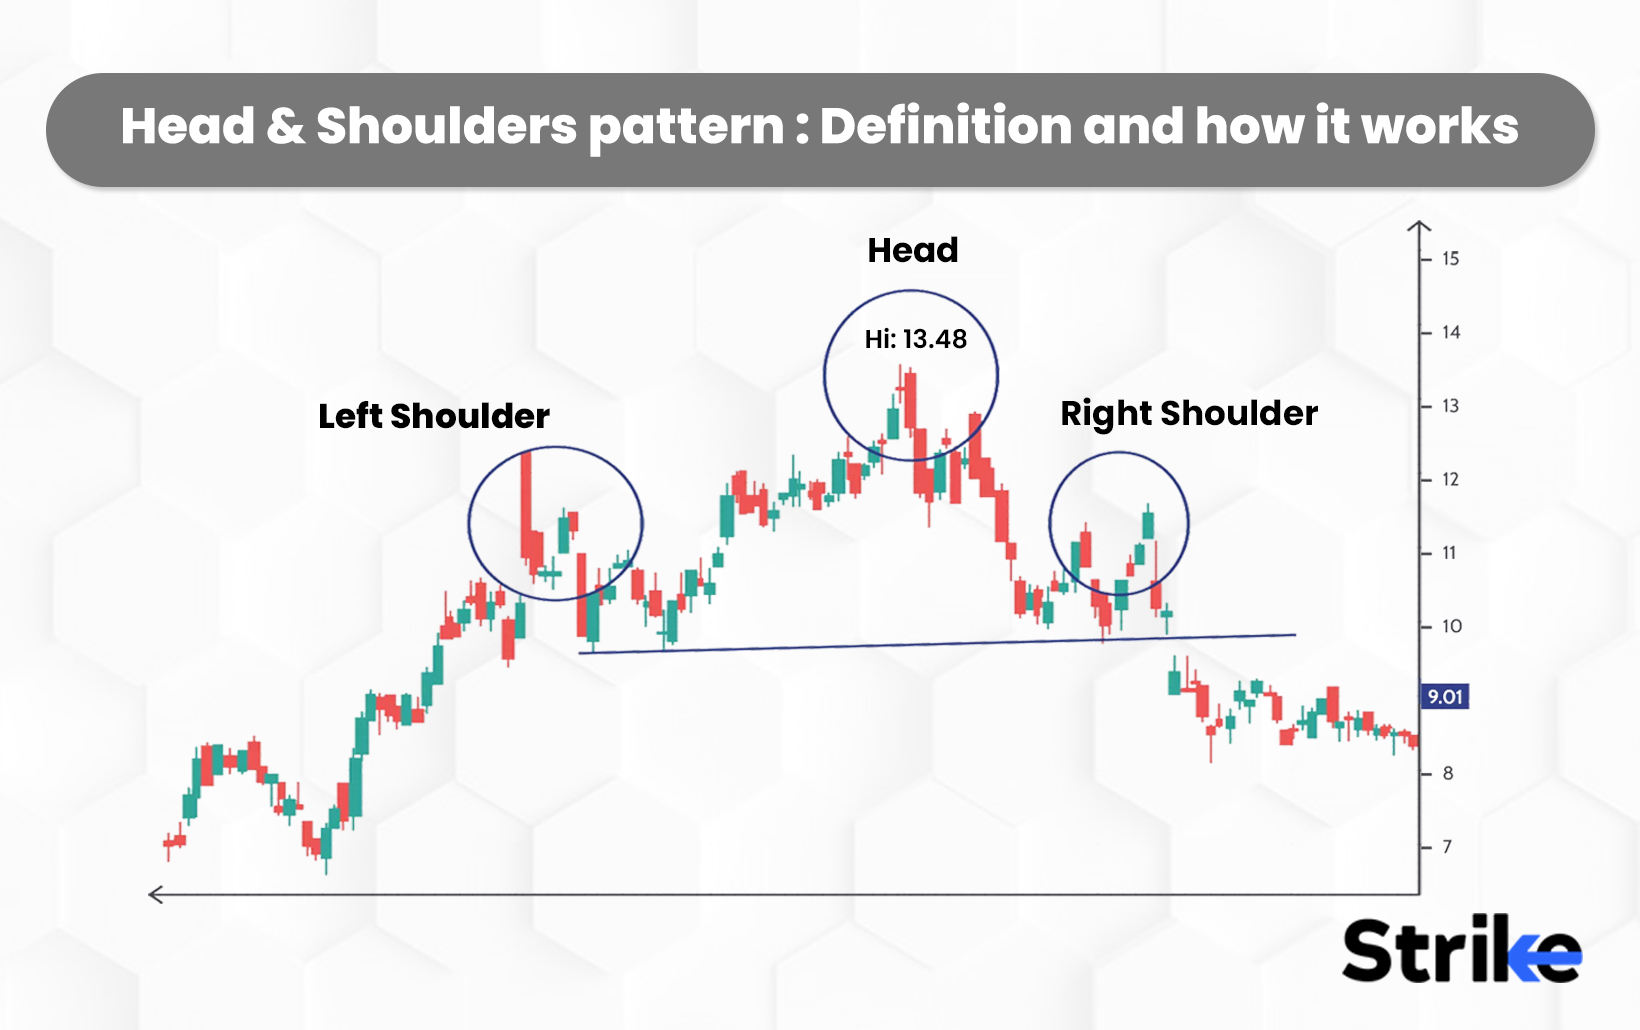 Head and shoulders pattern: Definition and how it works